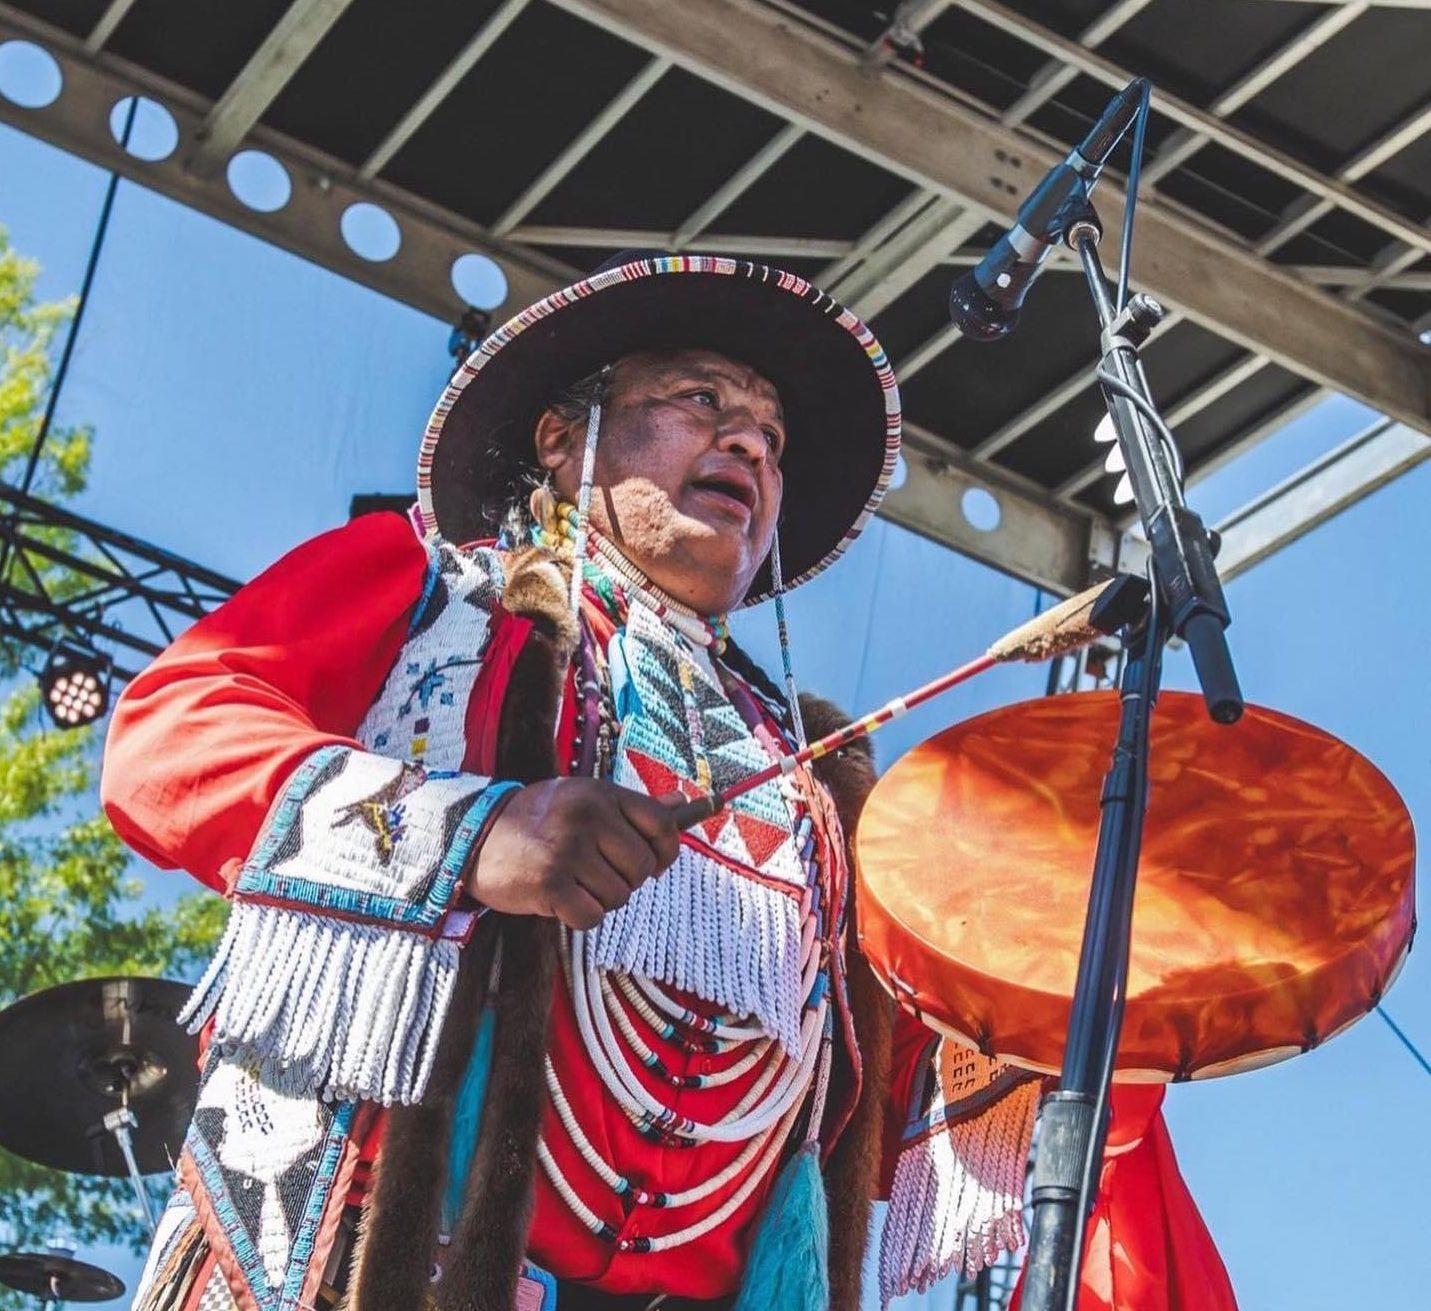 Pictured is Dan Nanamkin performing during a sunny day. He is wearing traditional Indigenous clothing, and playing an indigenous instrument as he sings into the microphone.